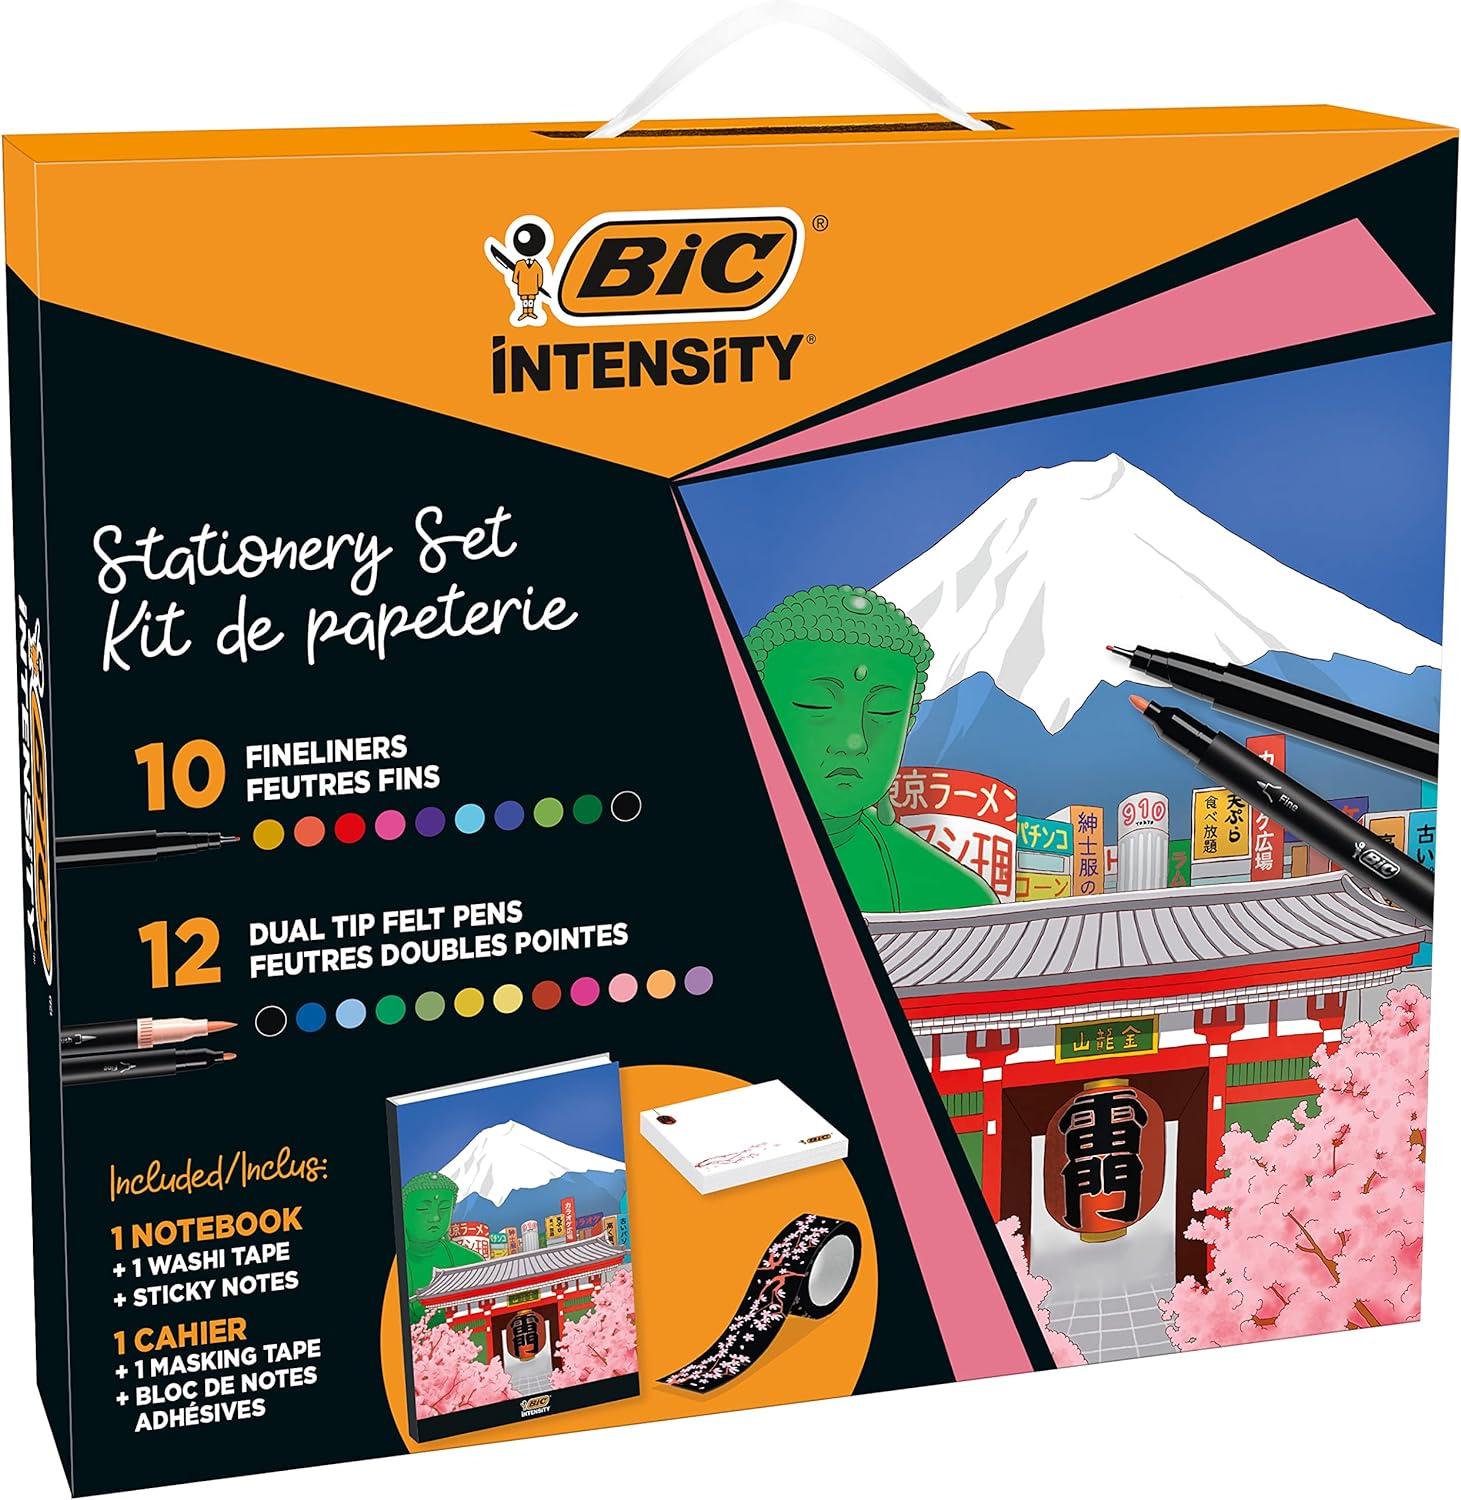 bic intensity japan stationery kit with fineliners dual-tip felt pens washi tape sticky notes notebook set of